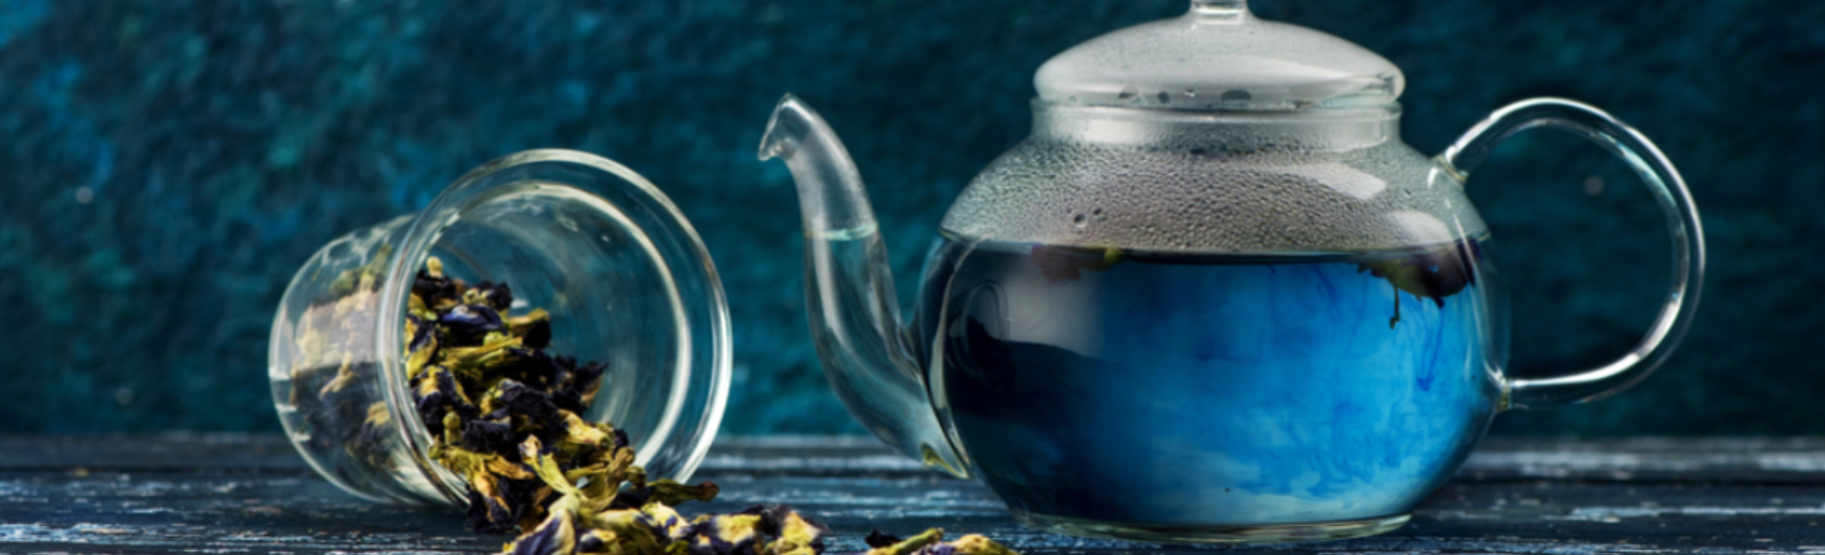 Blue Tea - NEW LAUNCHES : Get Upto 73% OFF